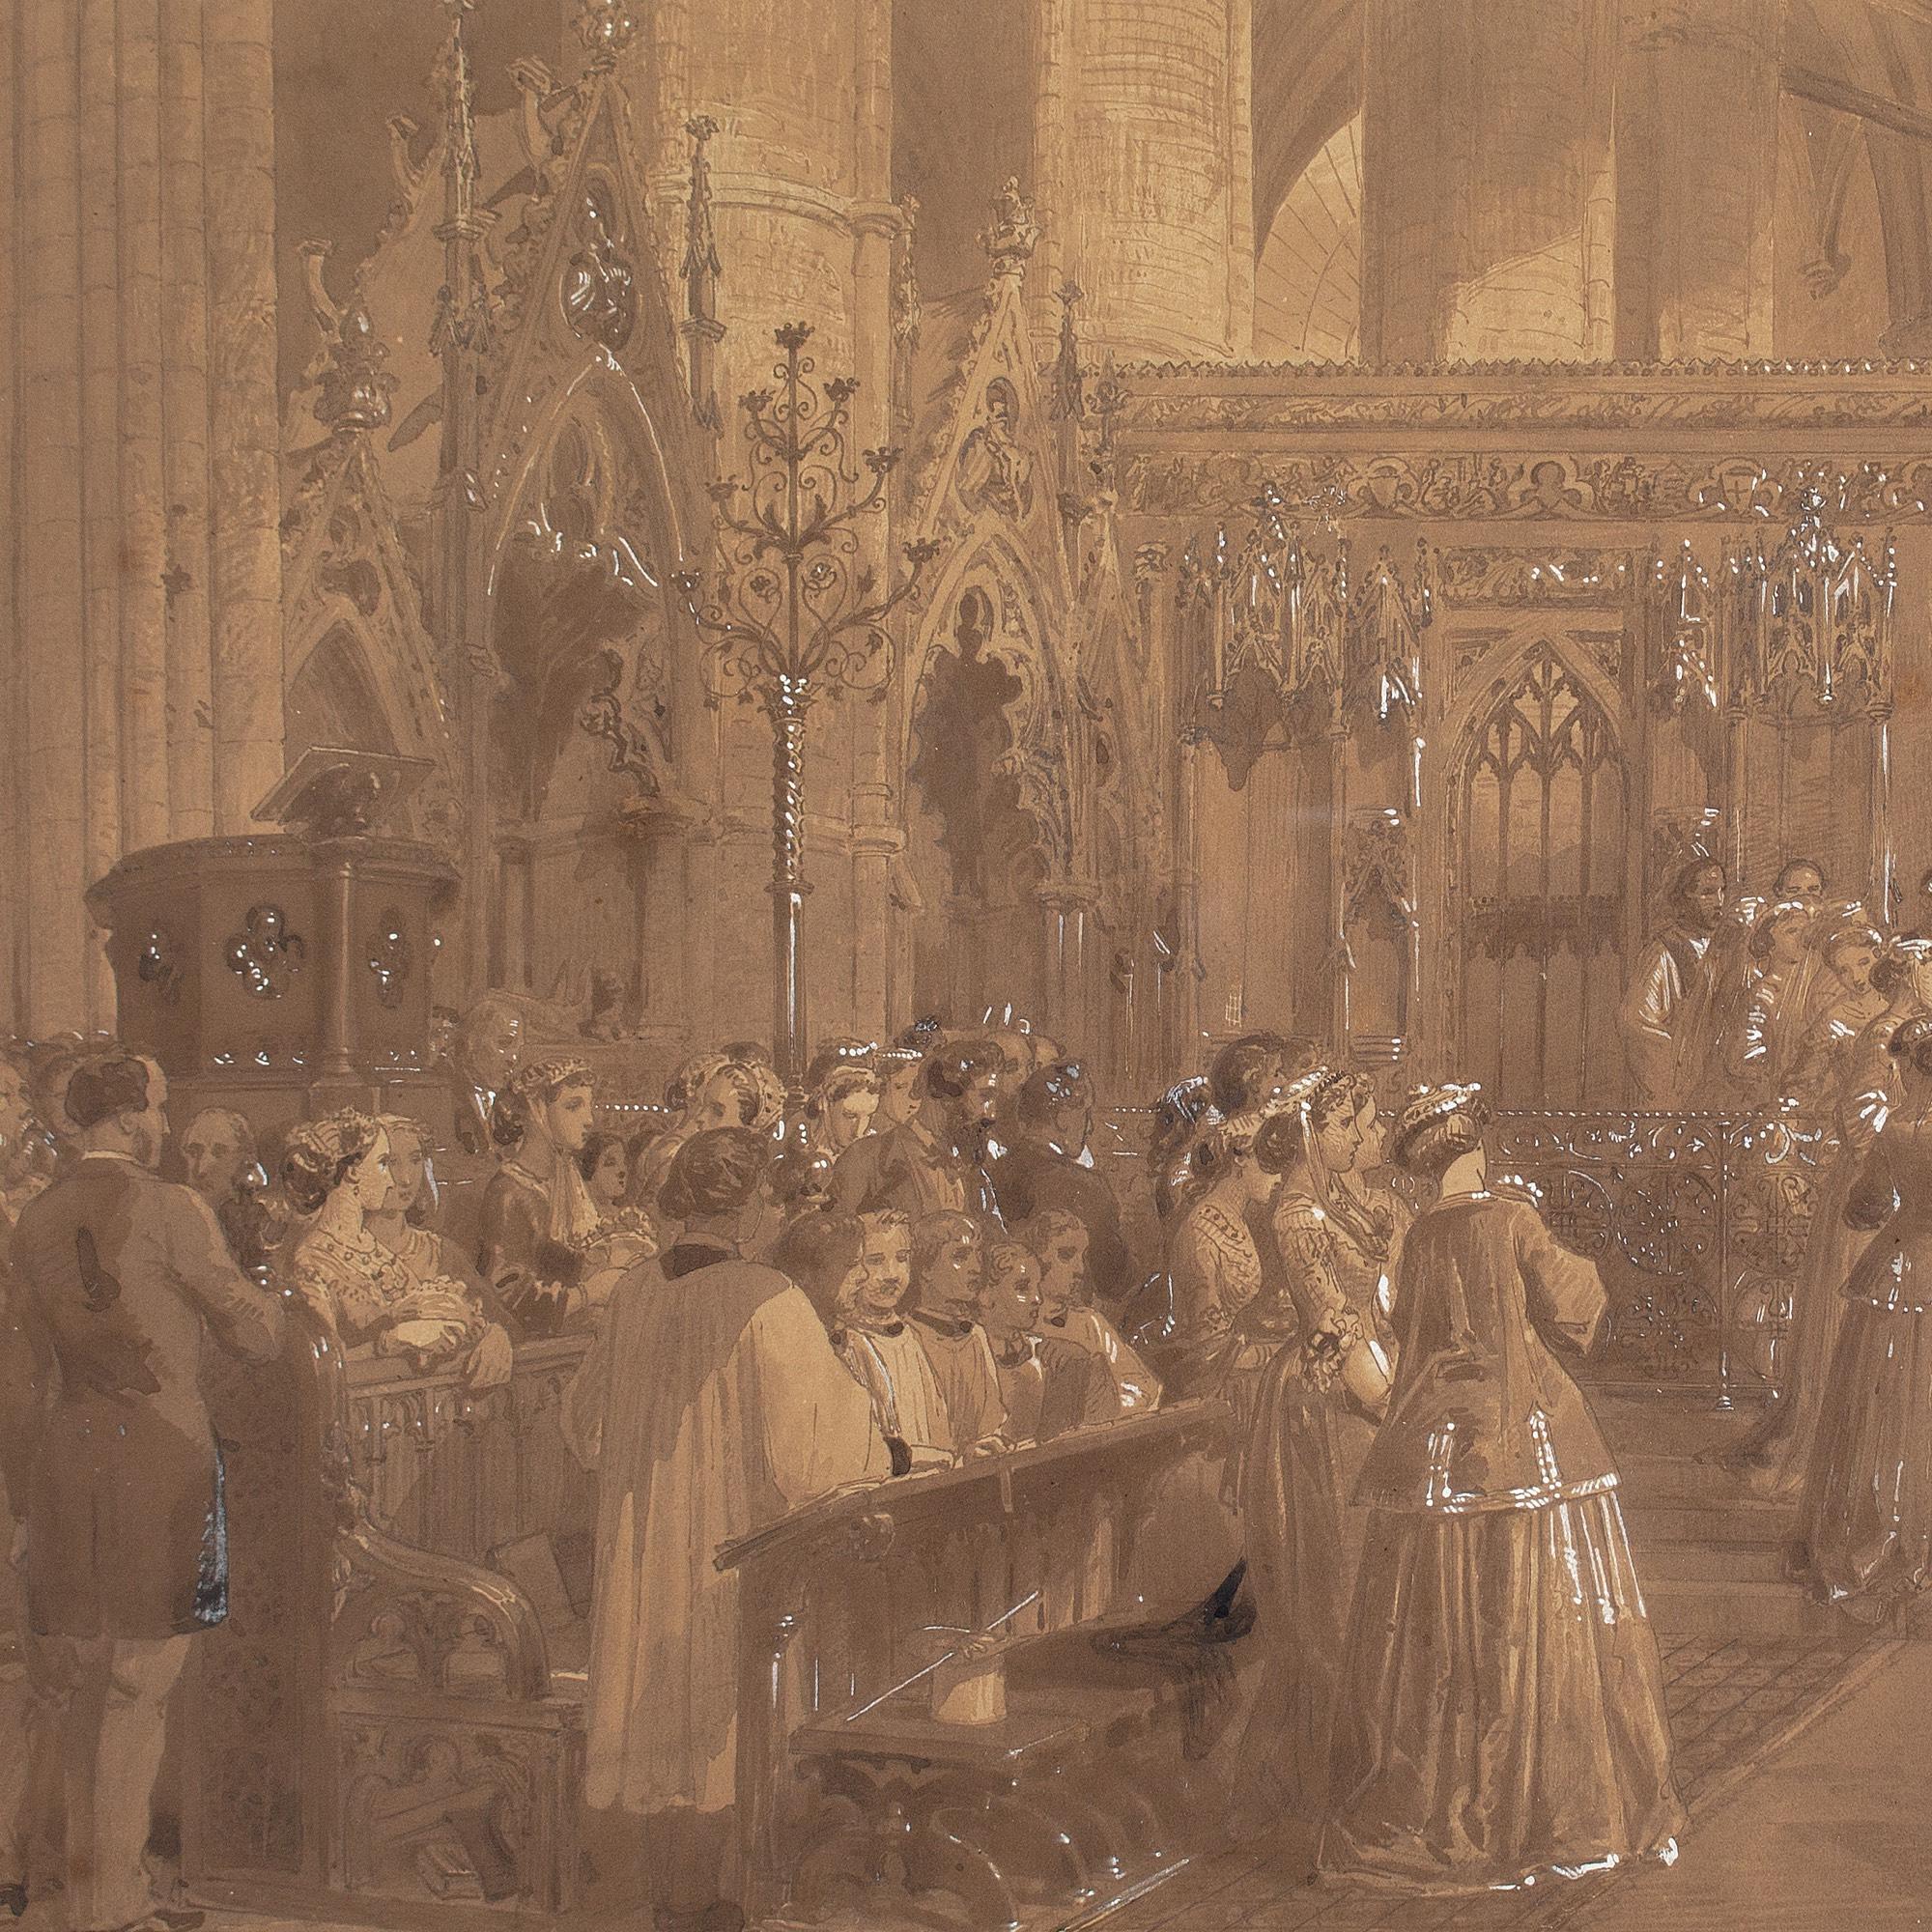 Edward Henry Corbould, Westminster Abbey, The Wedding 5